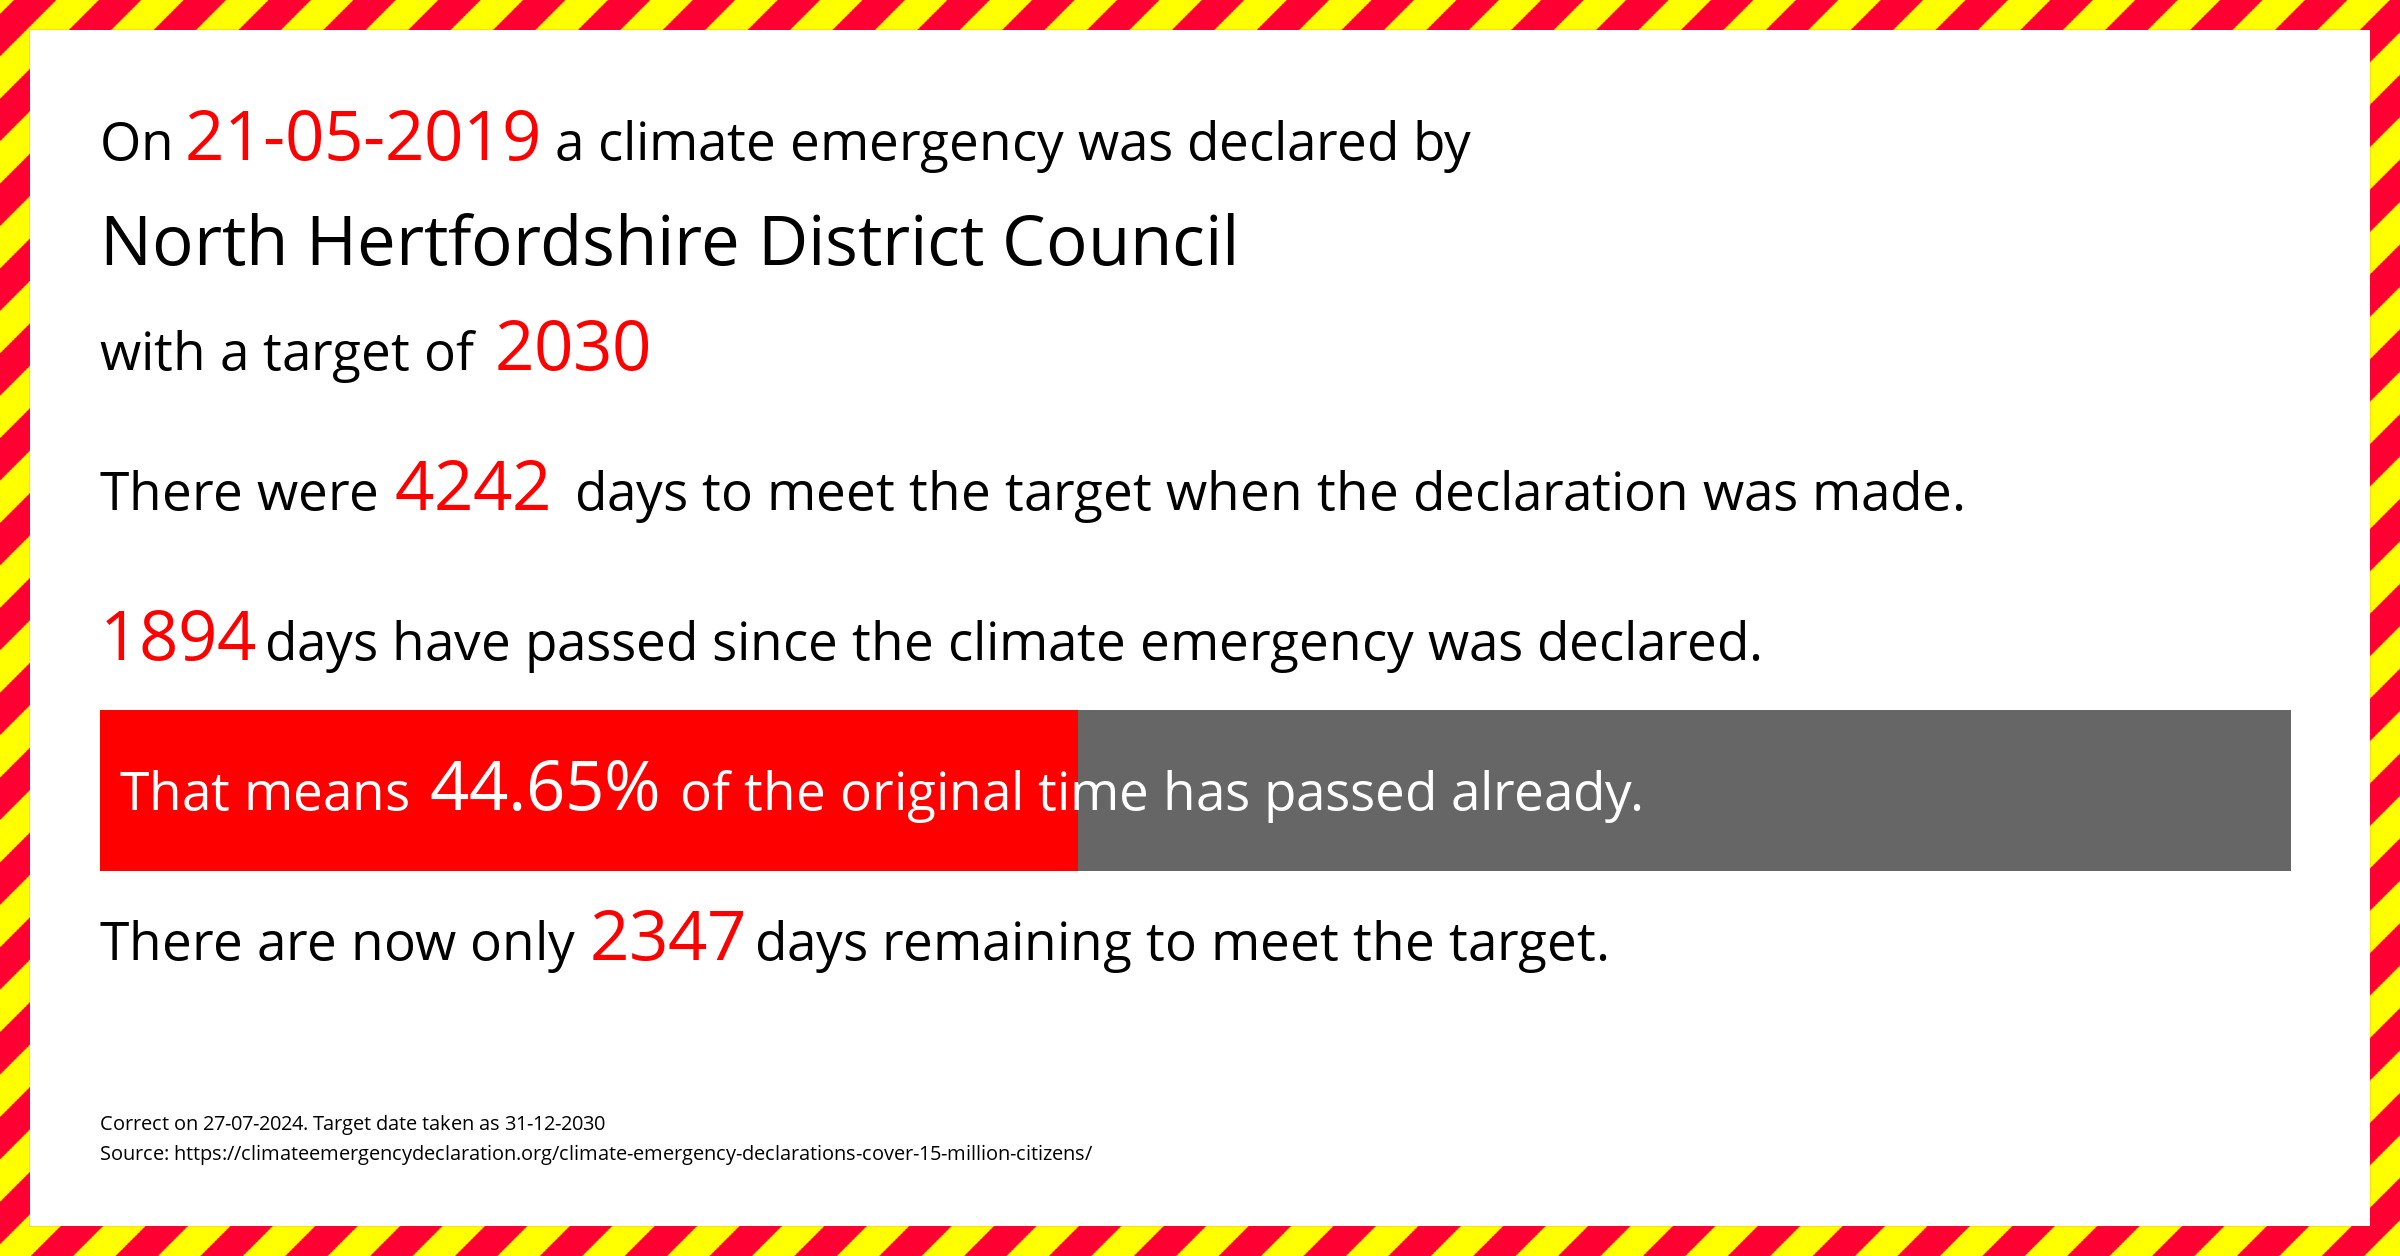 North Hertfordshire District Council declared a Climate emergency on Tuesday 21st May 2019, with a target of 2030.